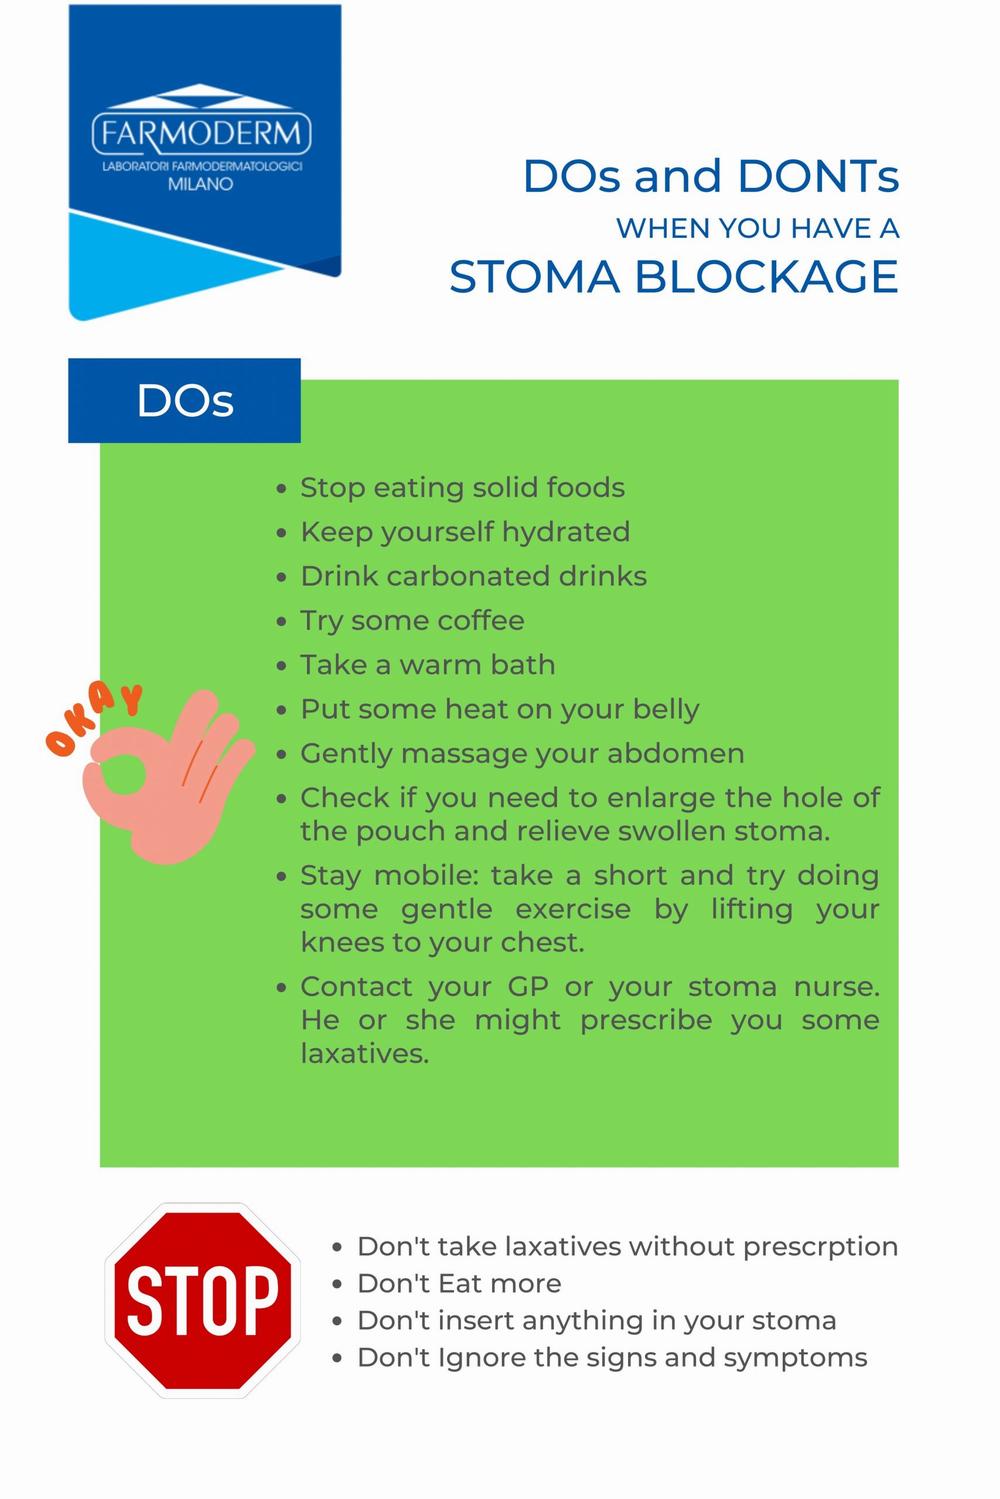 A list of things to do and not to do when you have a stoma blockage.